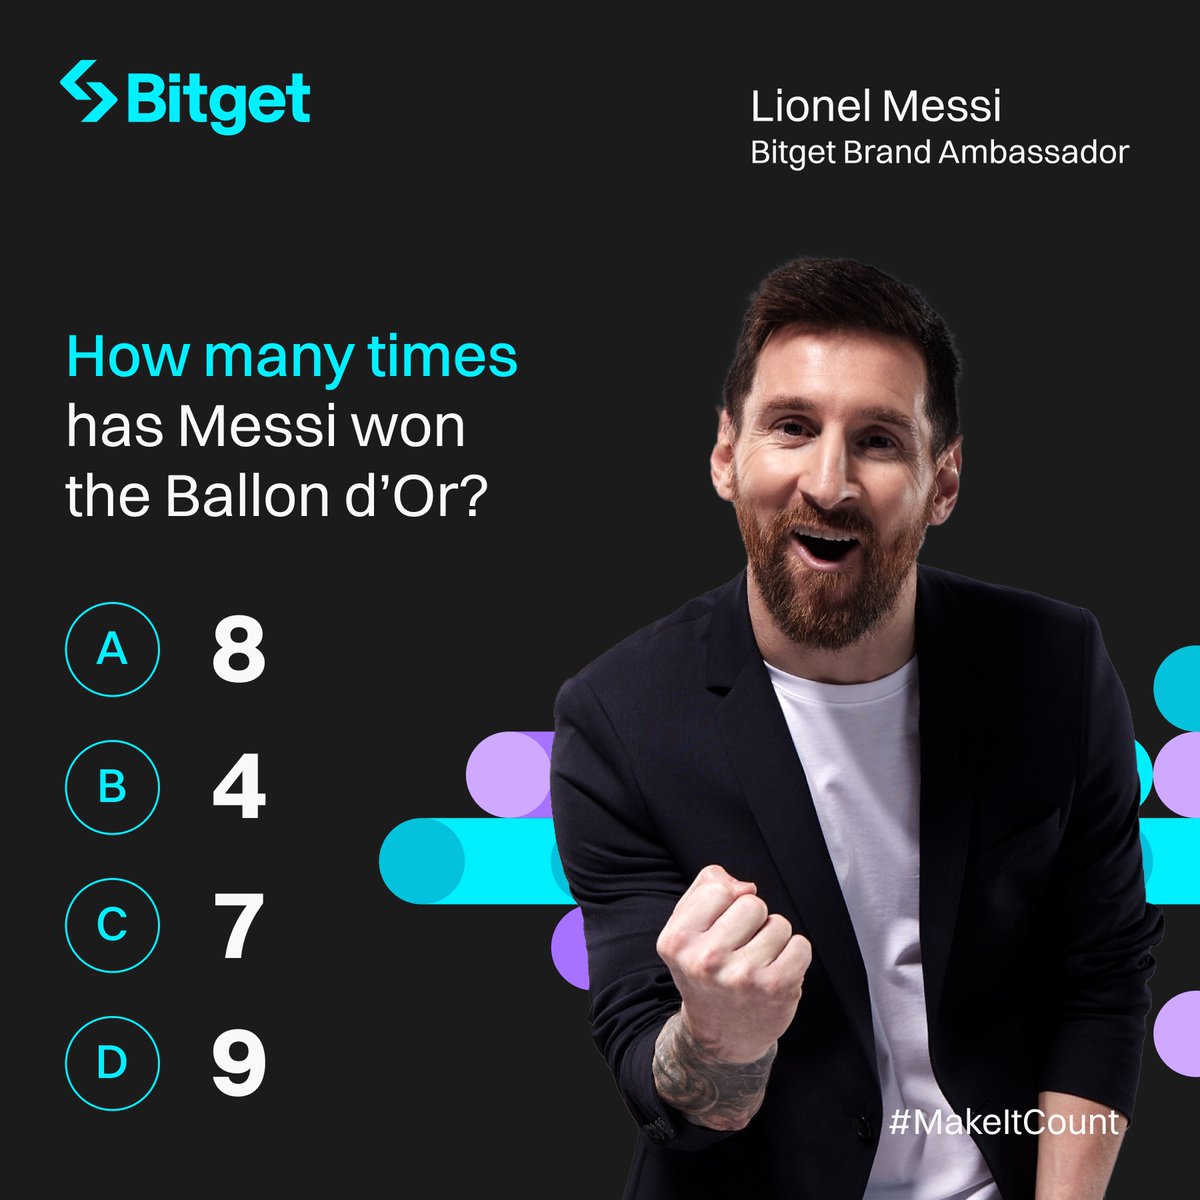 ⚽ Get ready for the Ballon d'Or! 🌟 🏆 Messi's shortlisted and we're pumped for his potential winning. 🙌 Let's #MakeItCount and celebrate together by joining our trivia! 💥 #Messi #BallonDOr2023 #GOAT